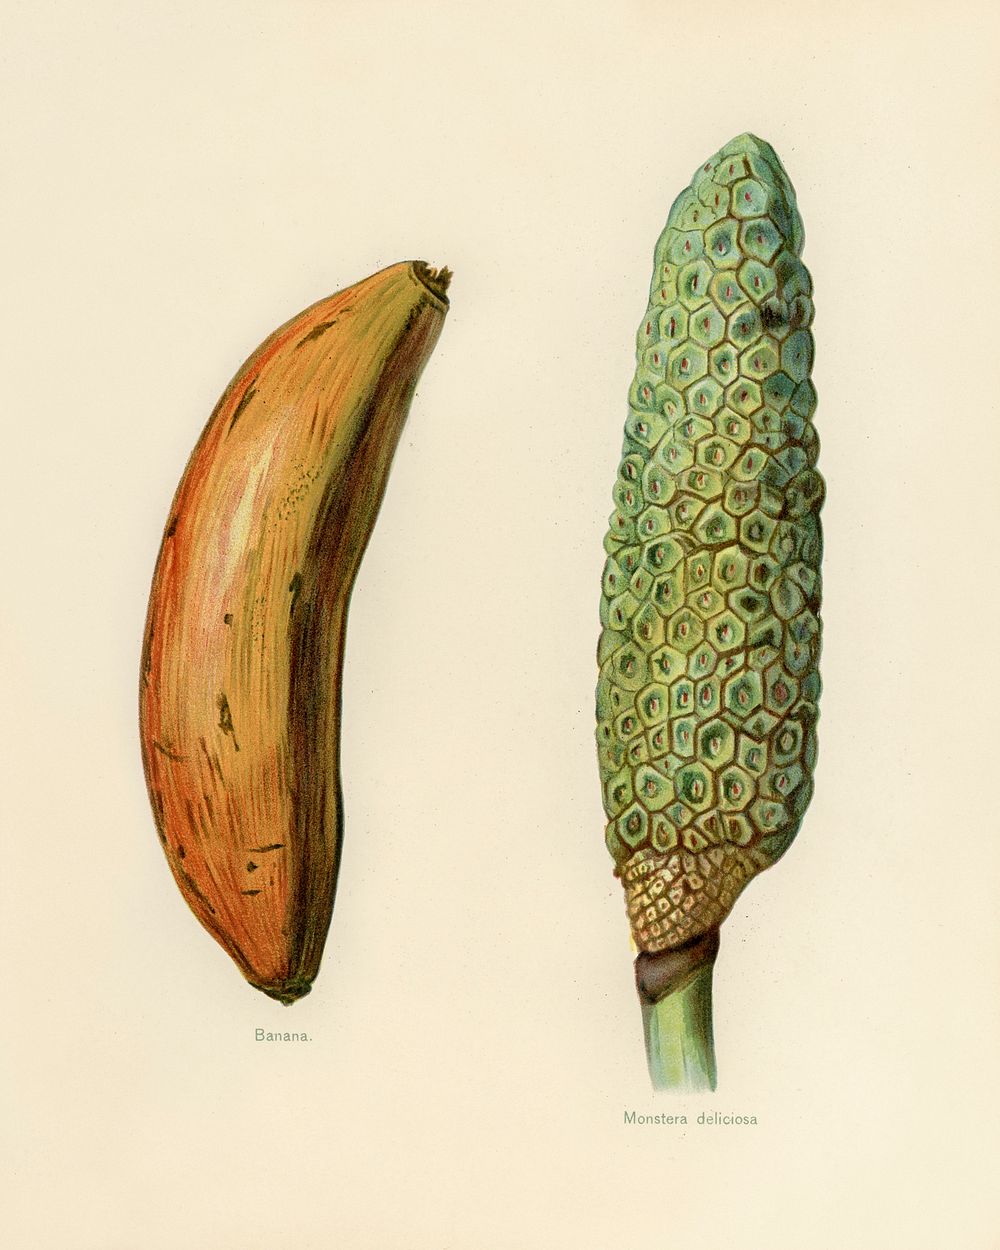 Vintage illustration of banana, monstera deliciosa digitally enhanced from our own vintage edition of The Fruit Grower's…